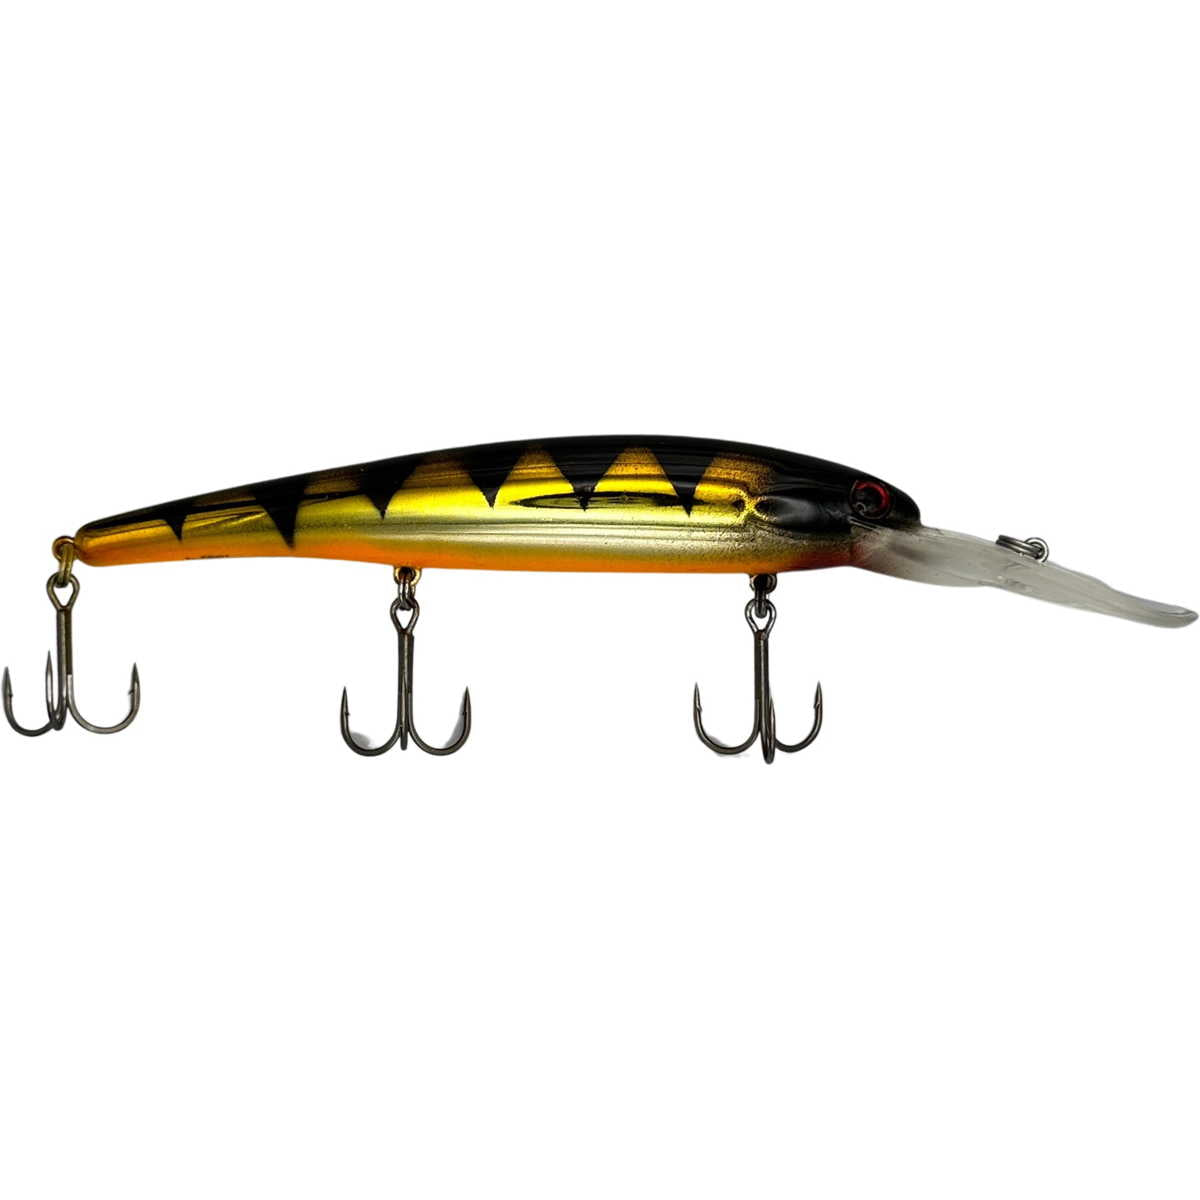 Photo of JT Custom Tackle Custom-Painted Bandit Walleye Deep Diver for sale at United Tackle Shops.